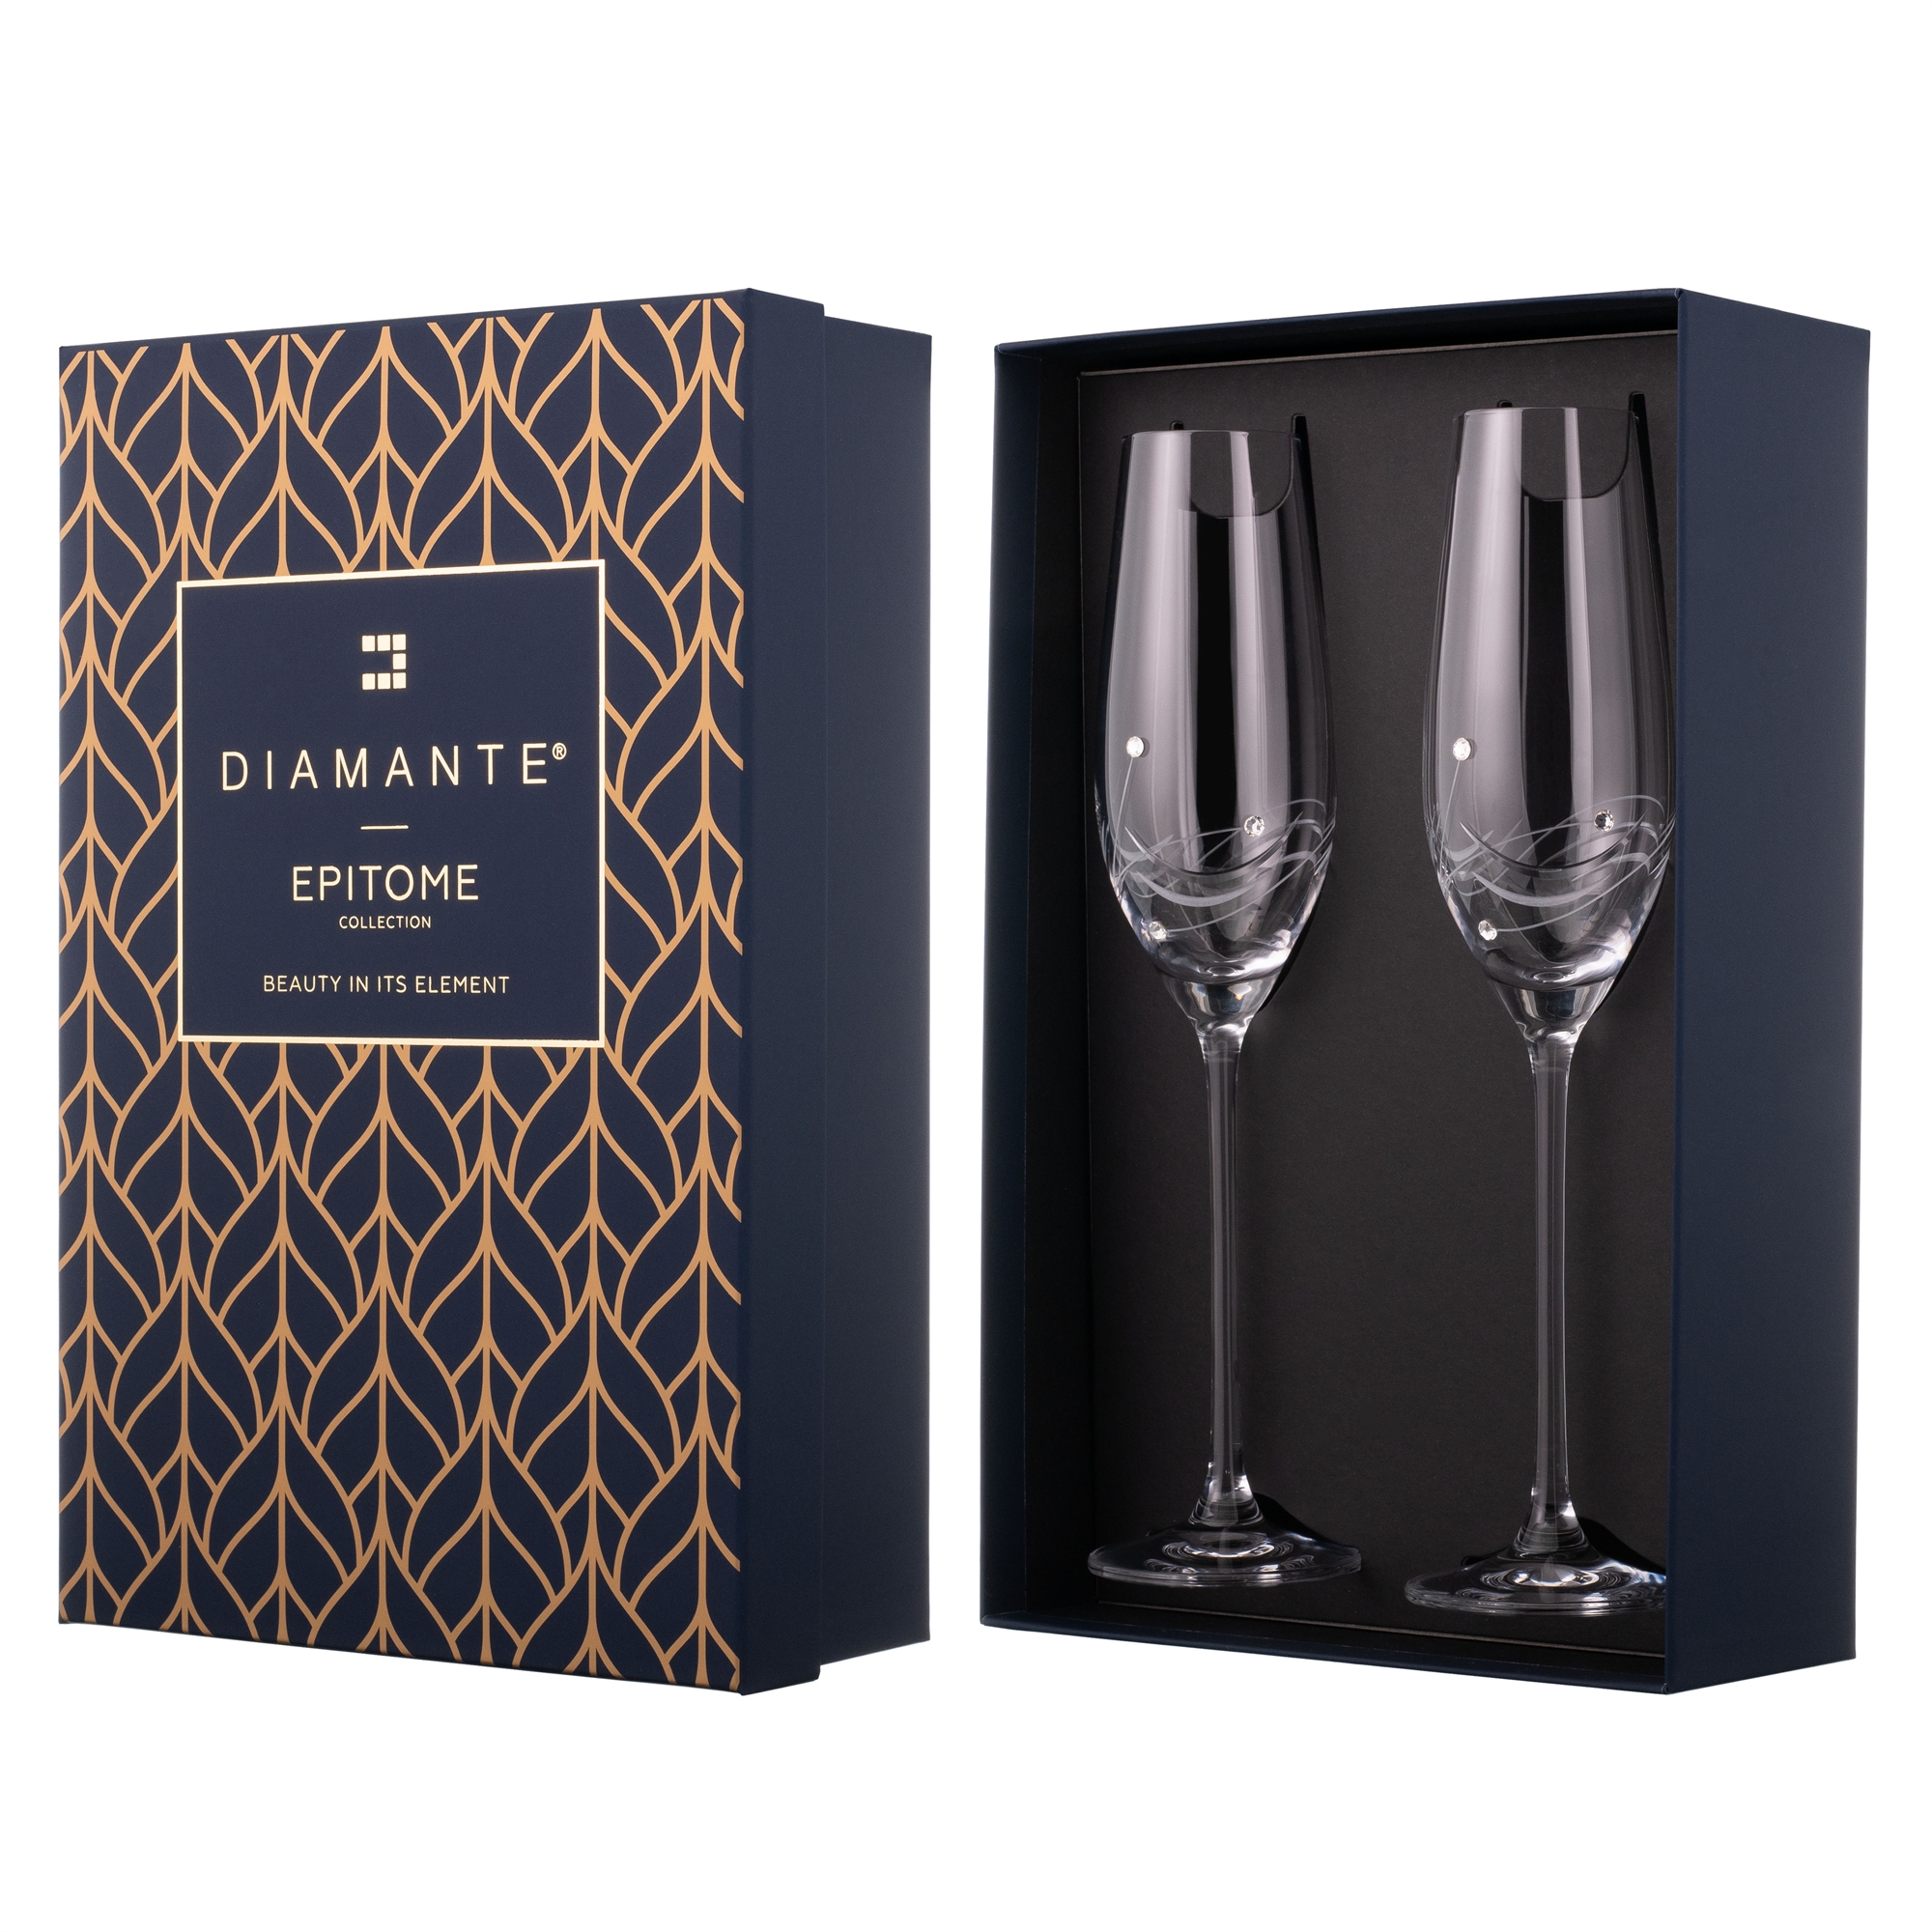 2 Diamante Champagne Flutes with Elegance Spiral Cutting in a Gift Box - SL130